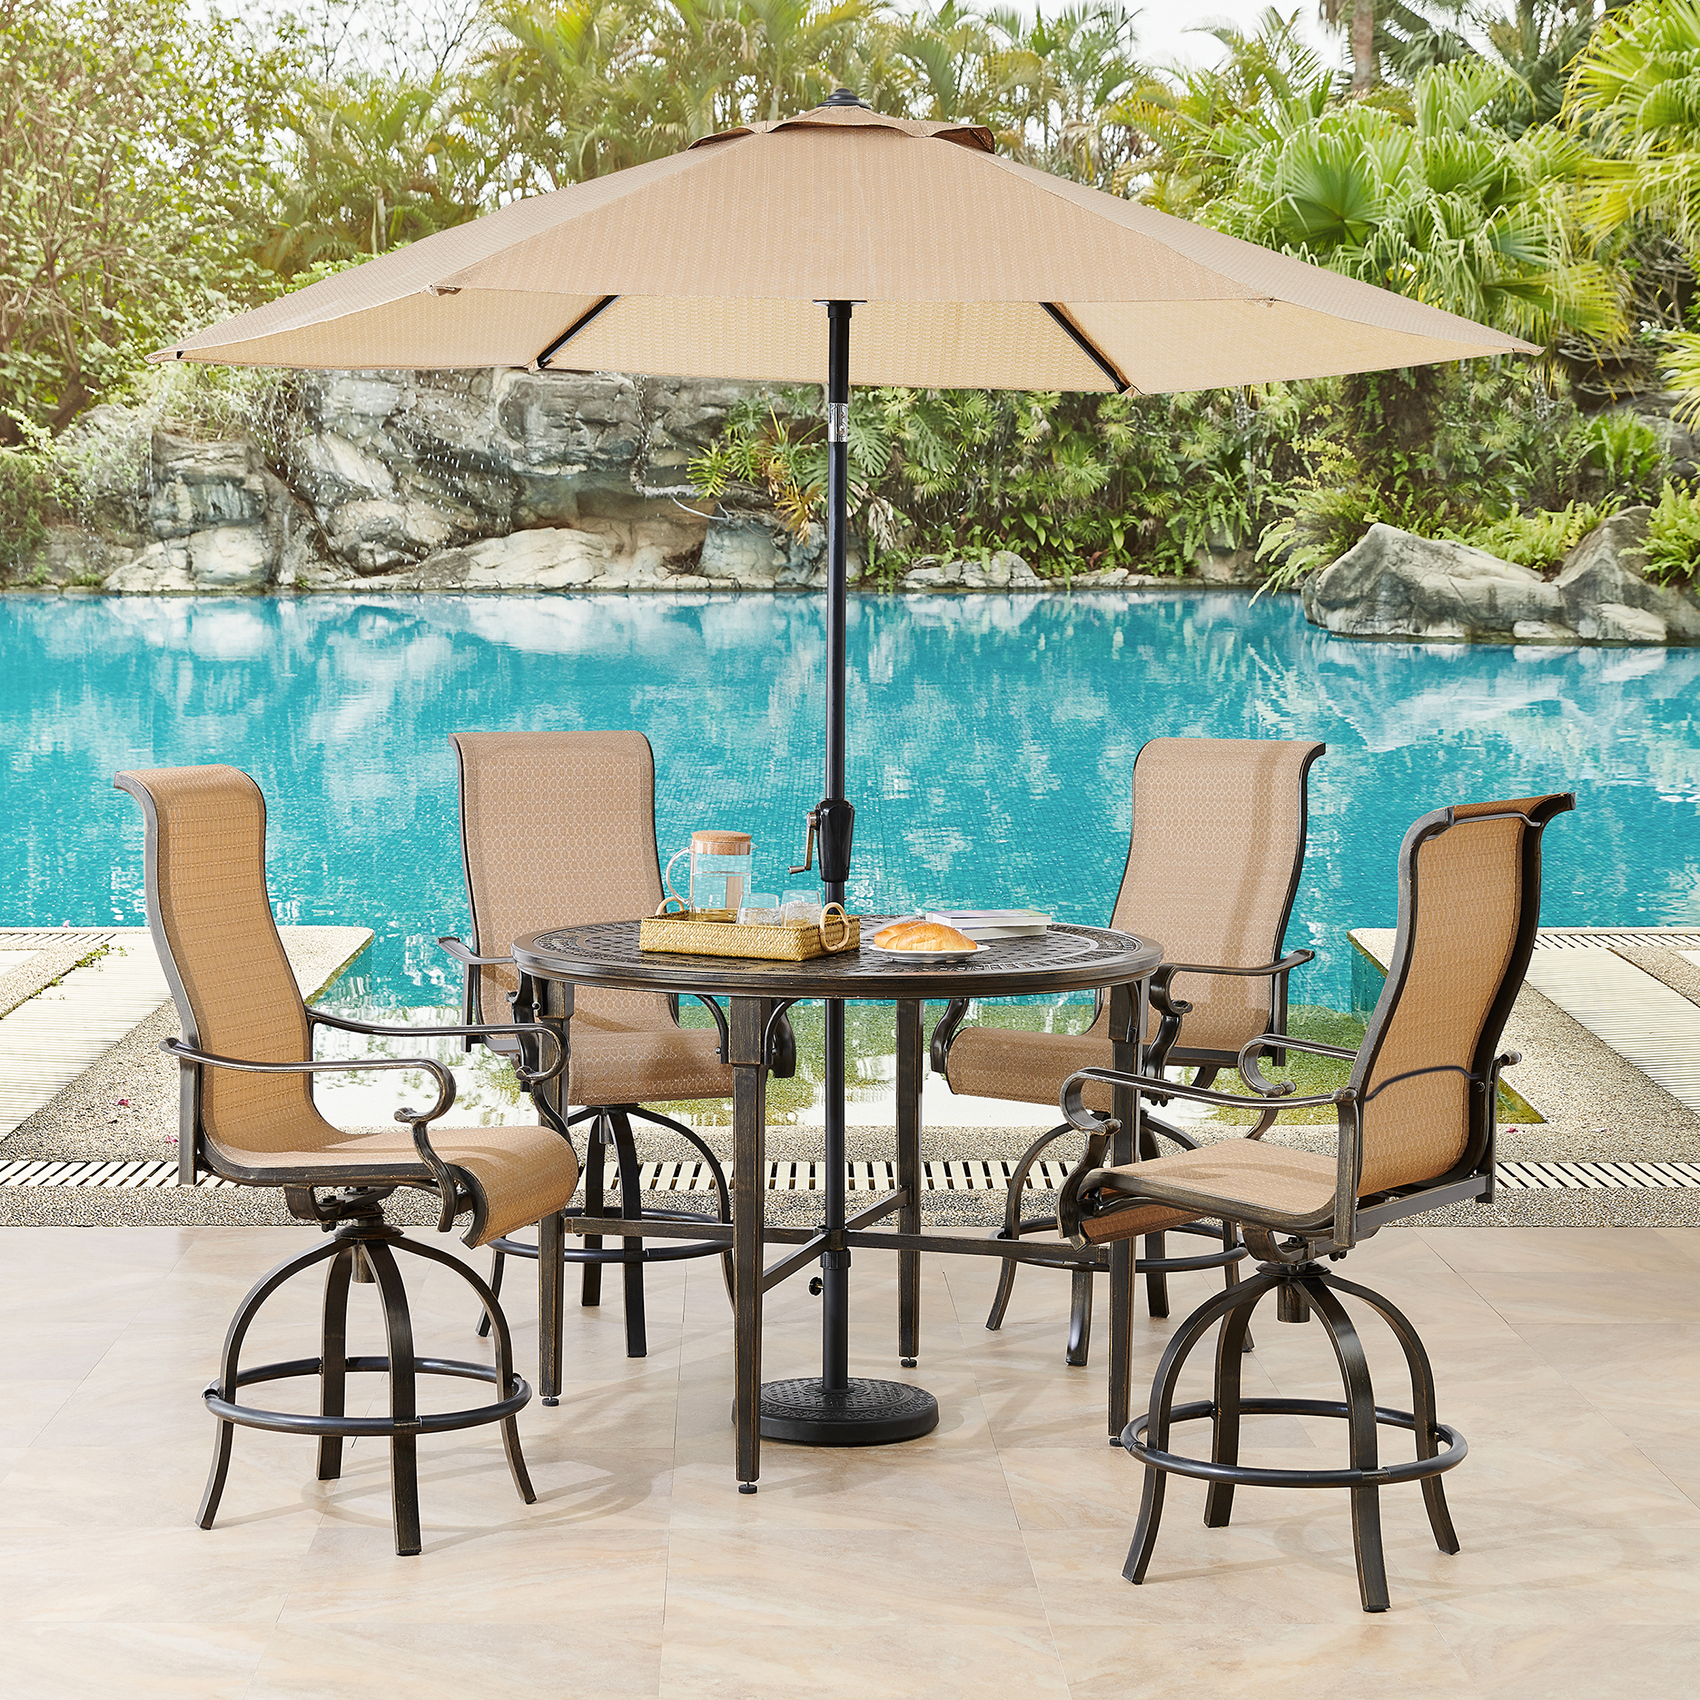 Hanover Brigantine 5-Piece Modern Outdoor High-Dining Set with Umbrella | 4 Countoured Counter-Height Swivel Chairs | 50'' Round Cast-Top Table | Weather, Rust, UV Resistant | Tan/Bronze | BRIGDN5PCBR - image 3 of 11